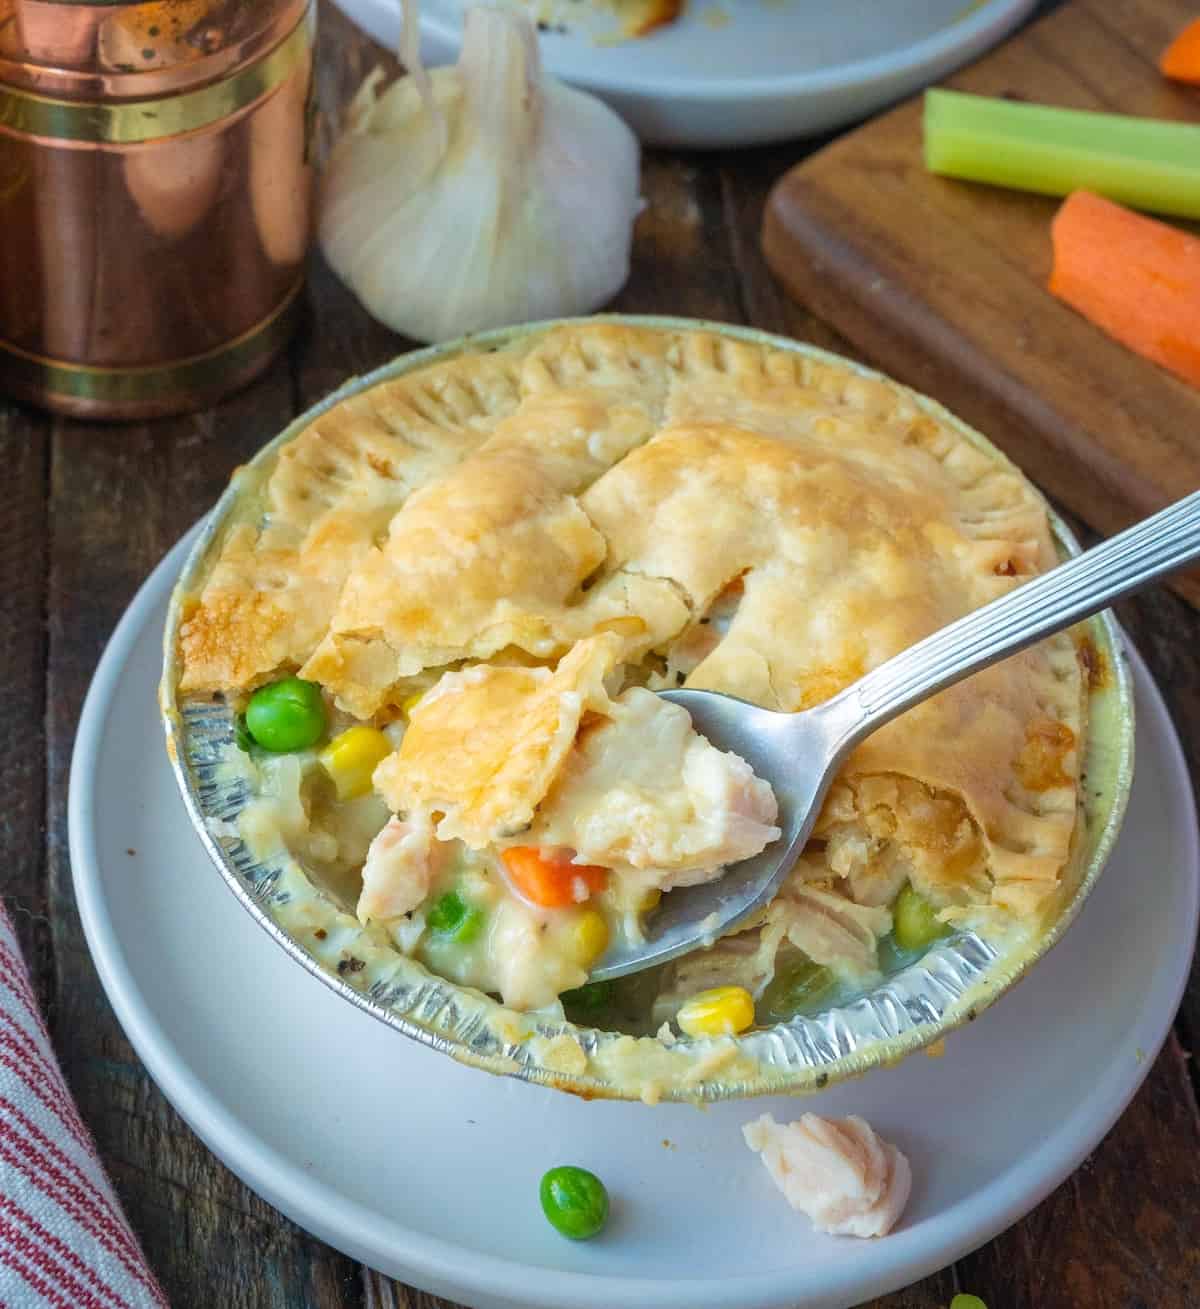 A spoon scooping out a bite of chicken pot pie.